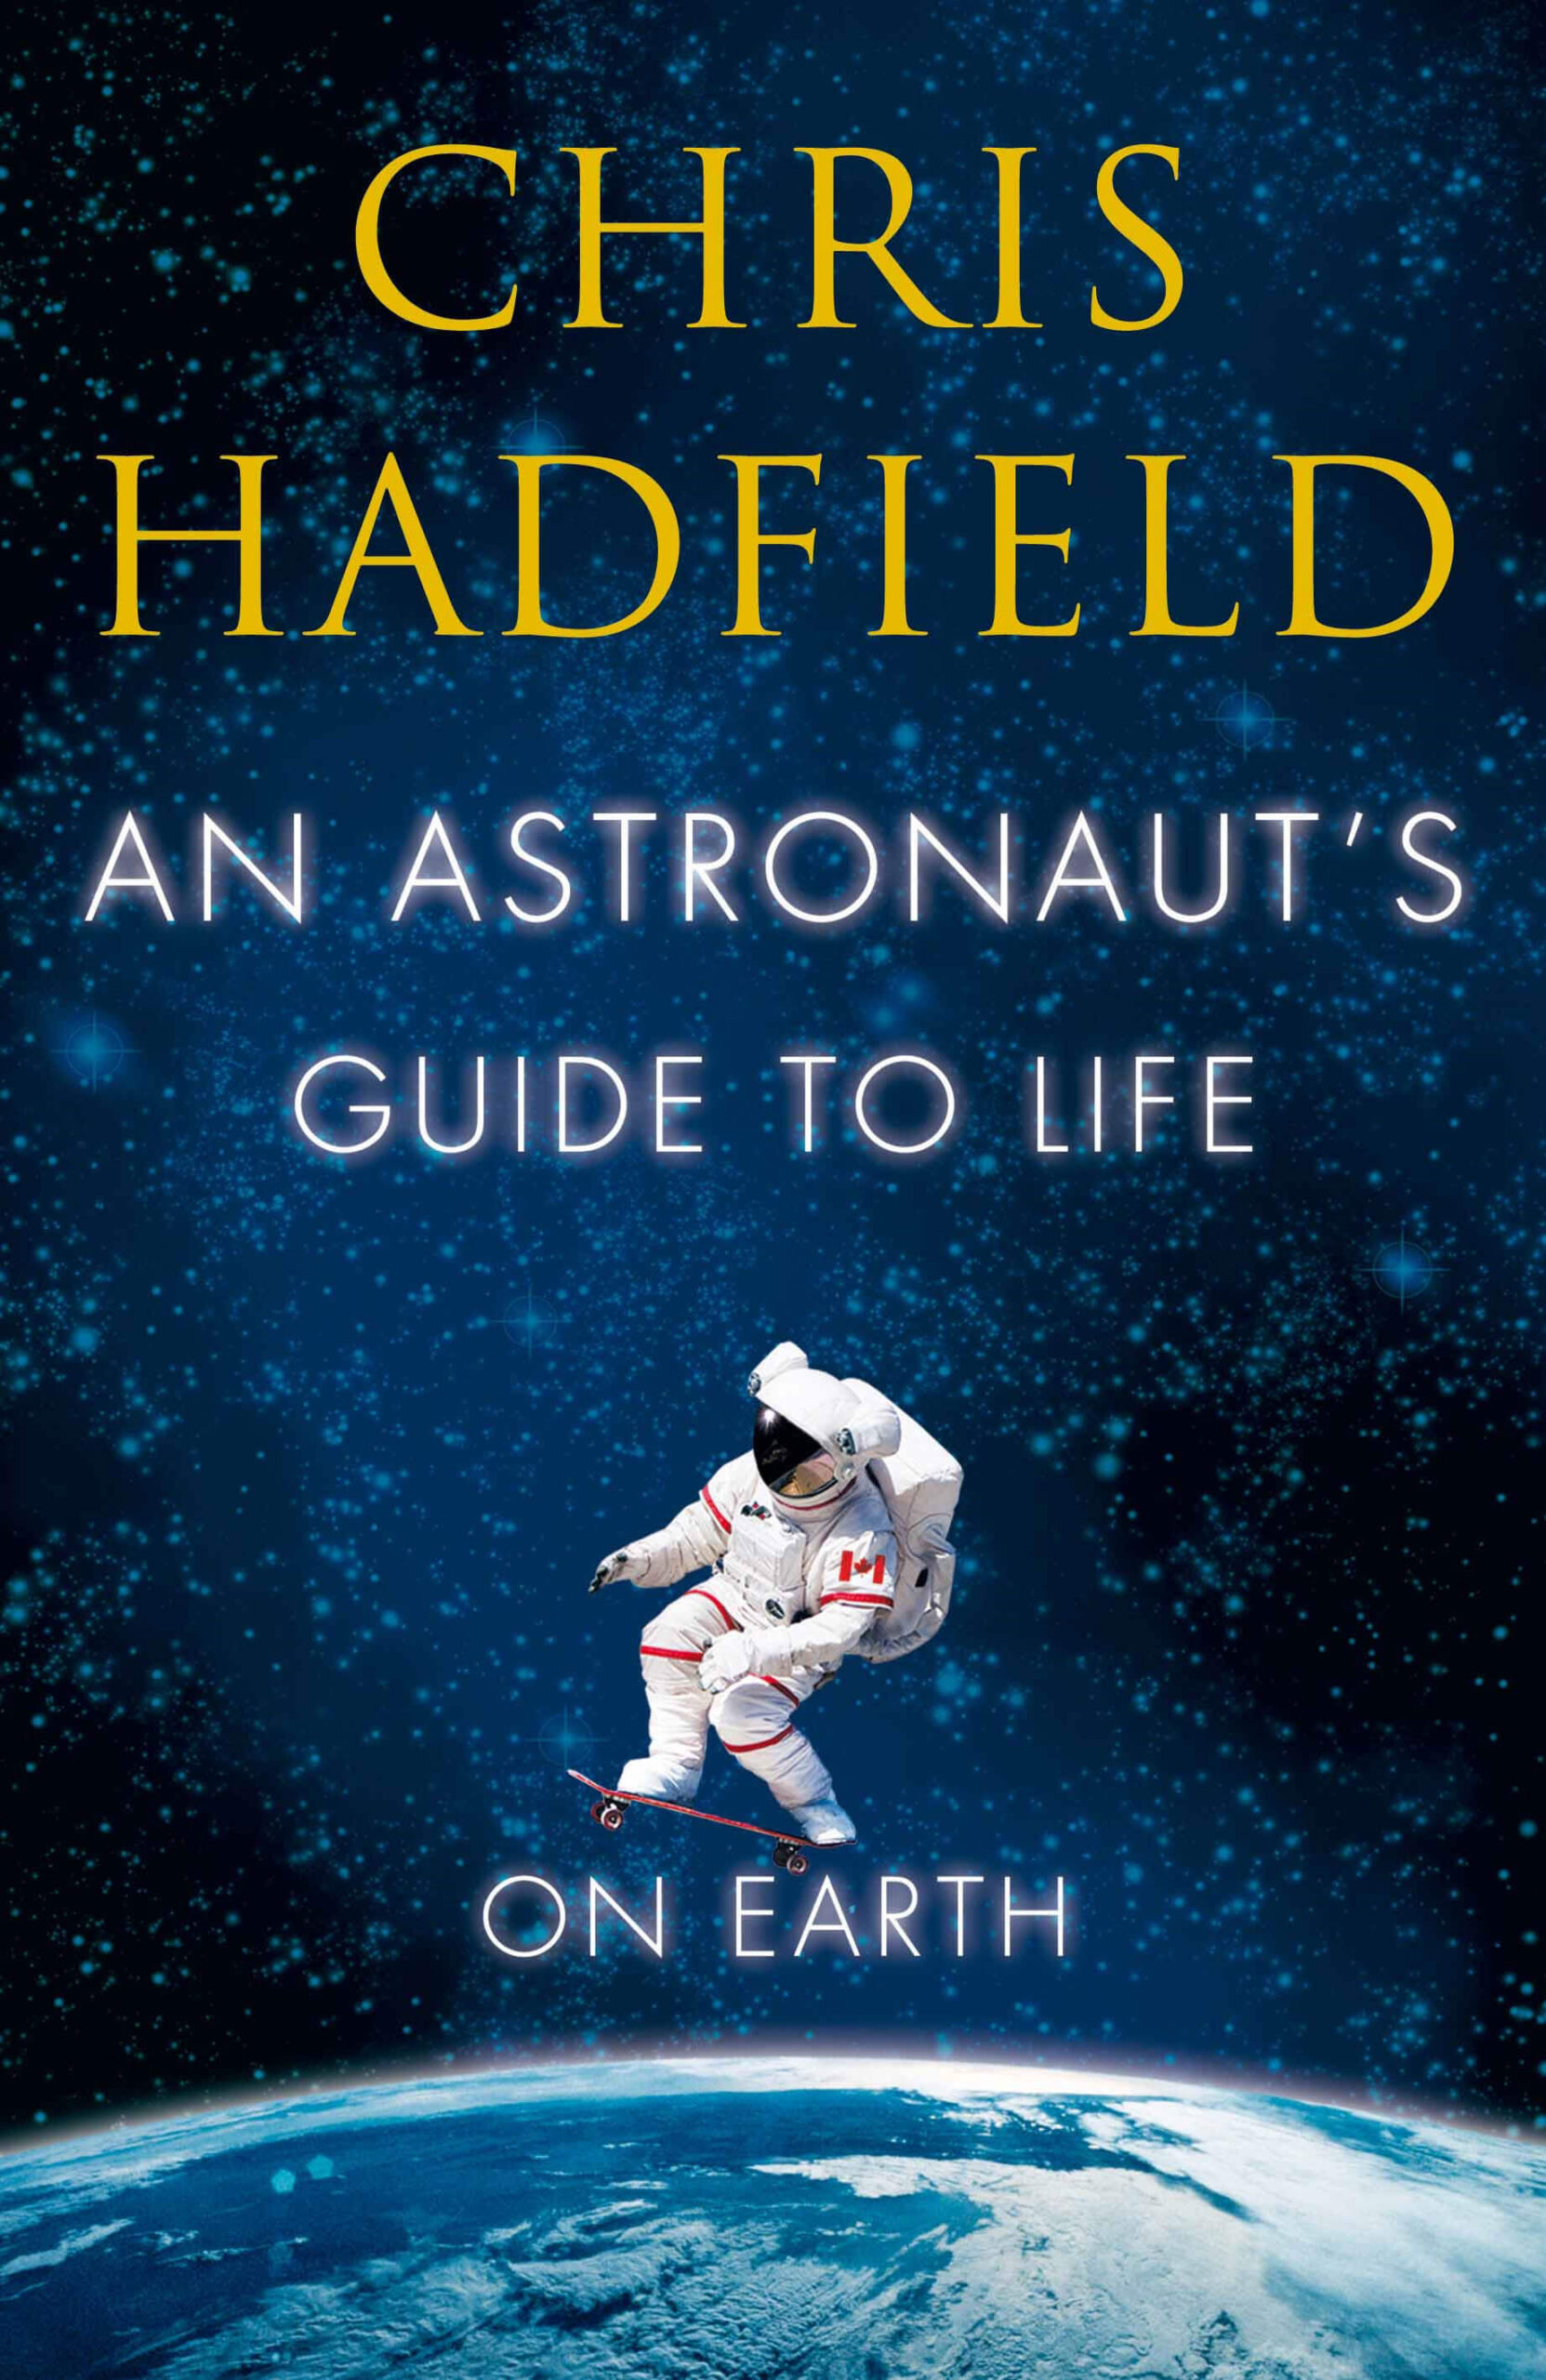 Book cover art from Chris Hadfield's 'An Astronaut's Guide to Life on Earth' - UK Version